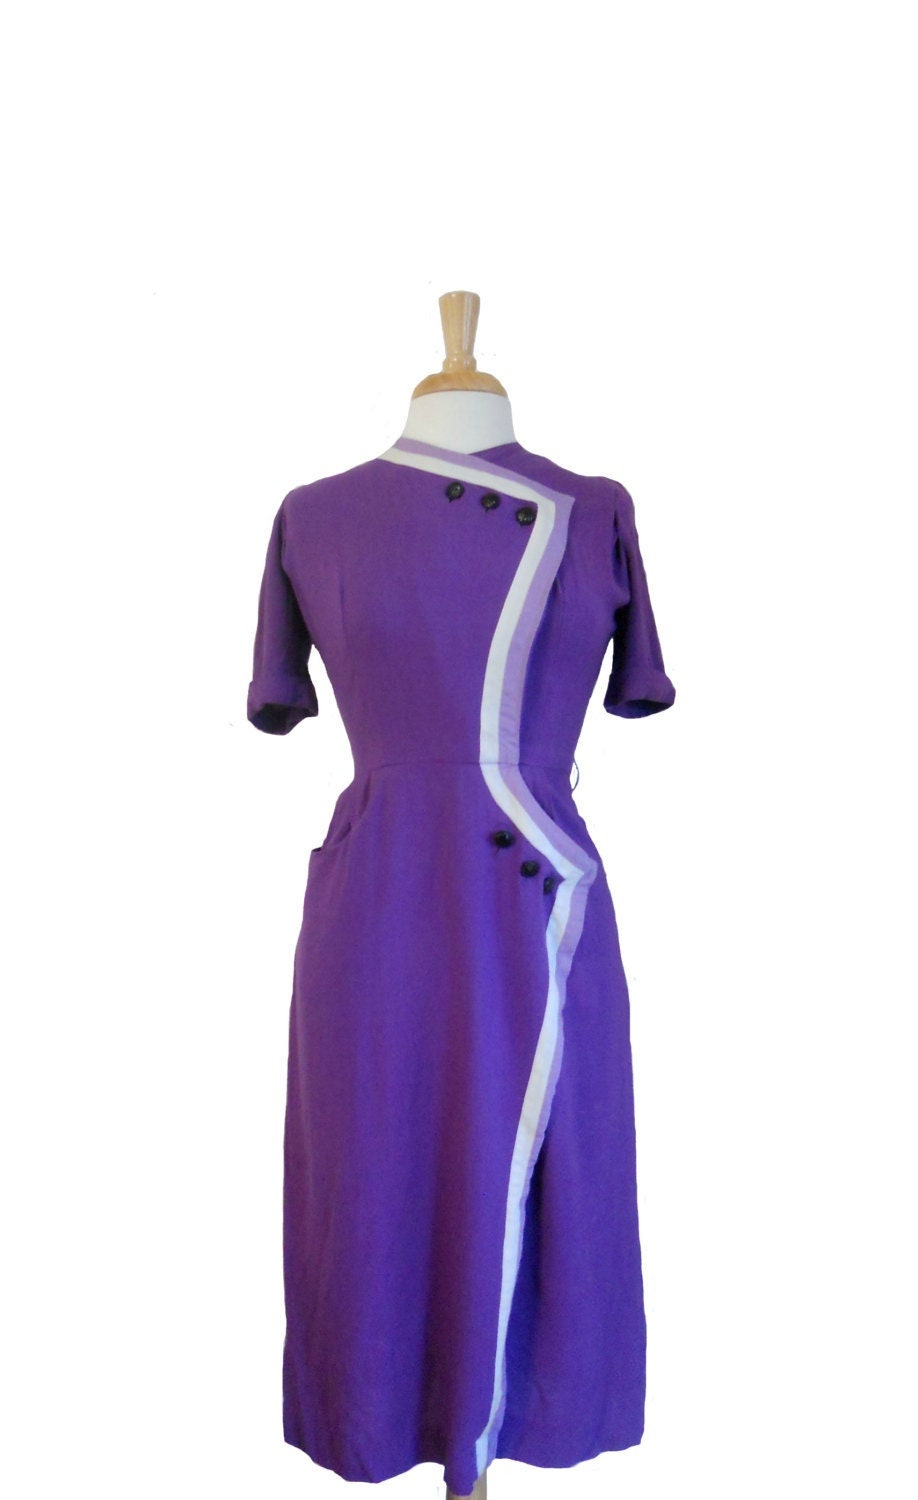 Vintage 1960s Dress Purple Wrap Design With Six Buttons and - Etsy